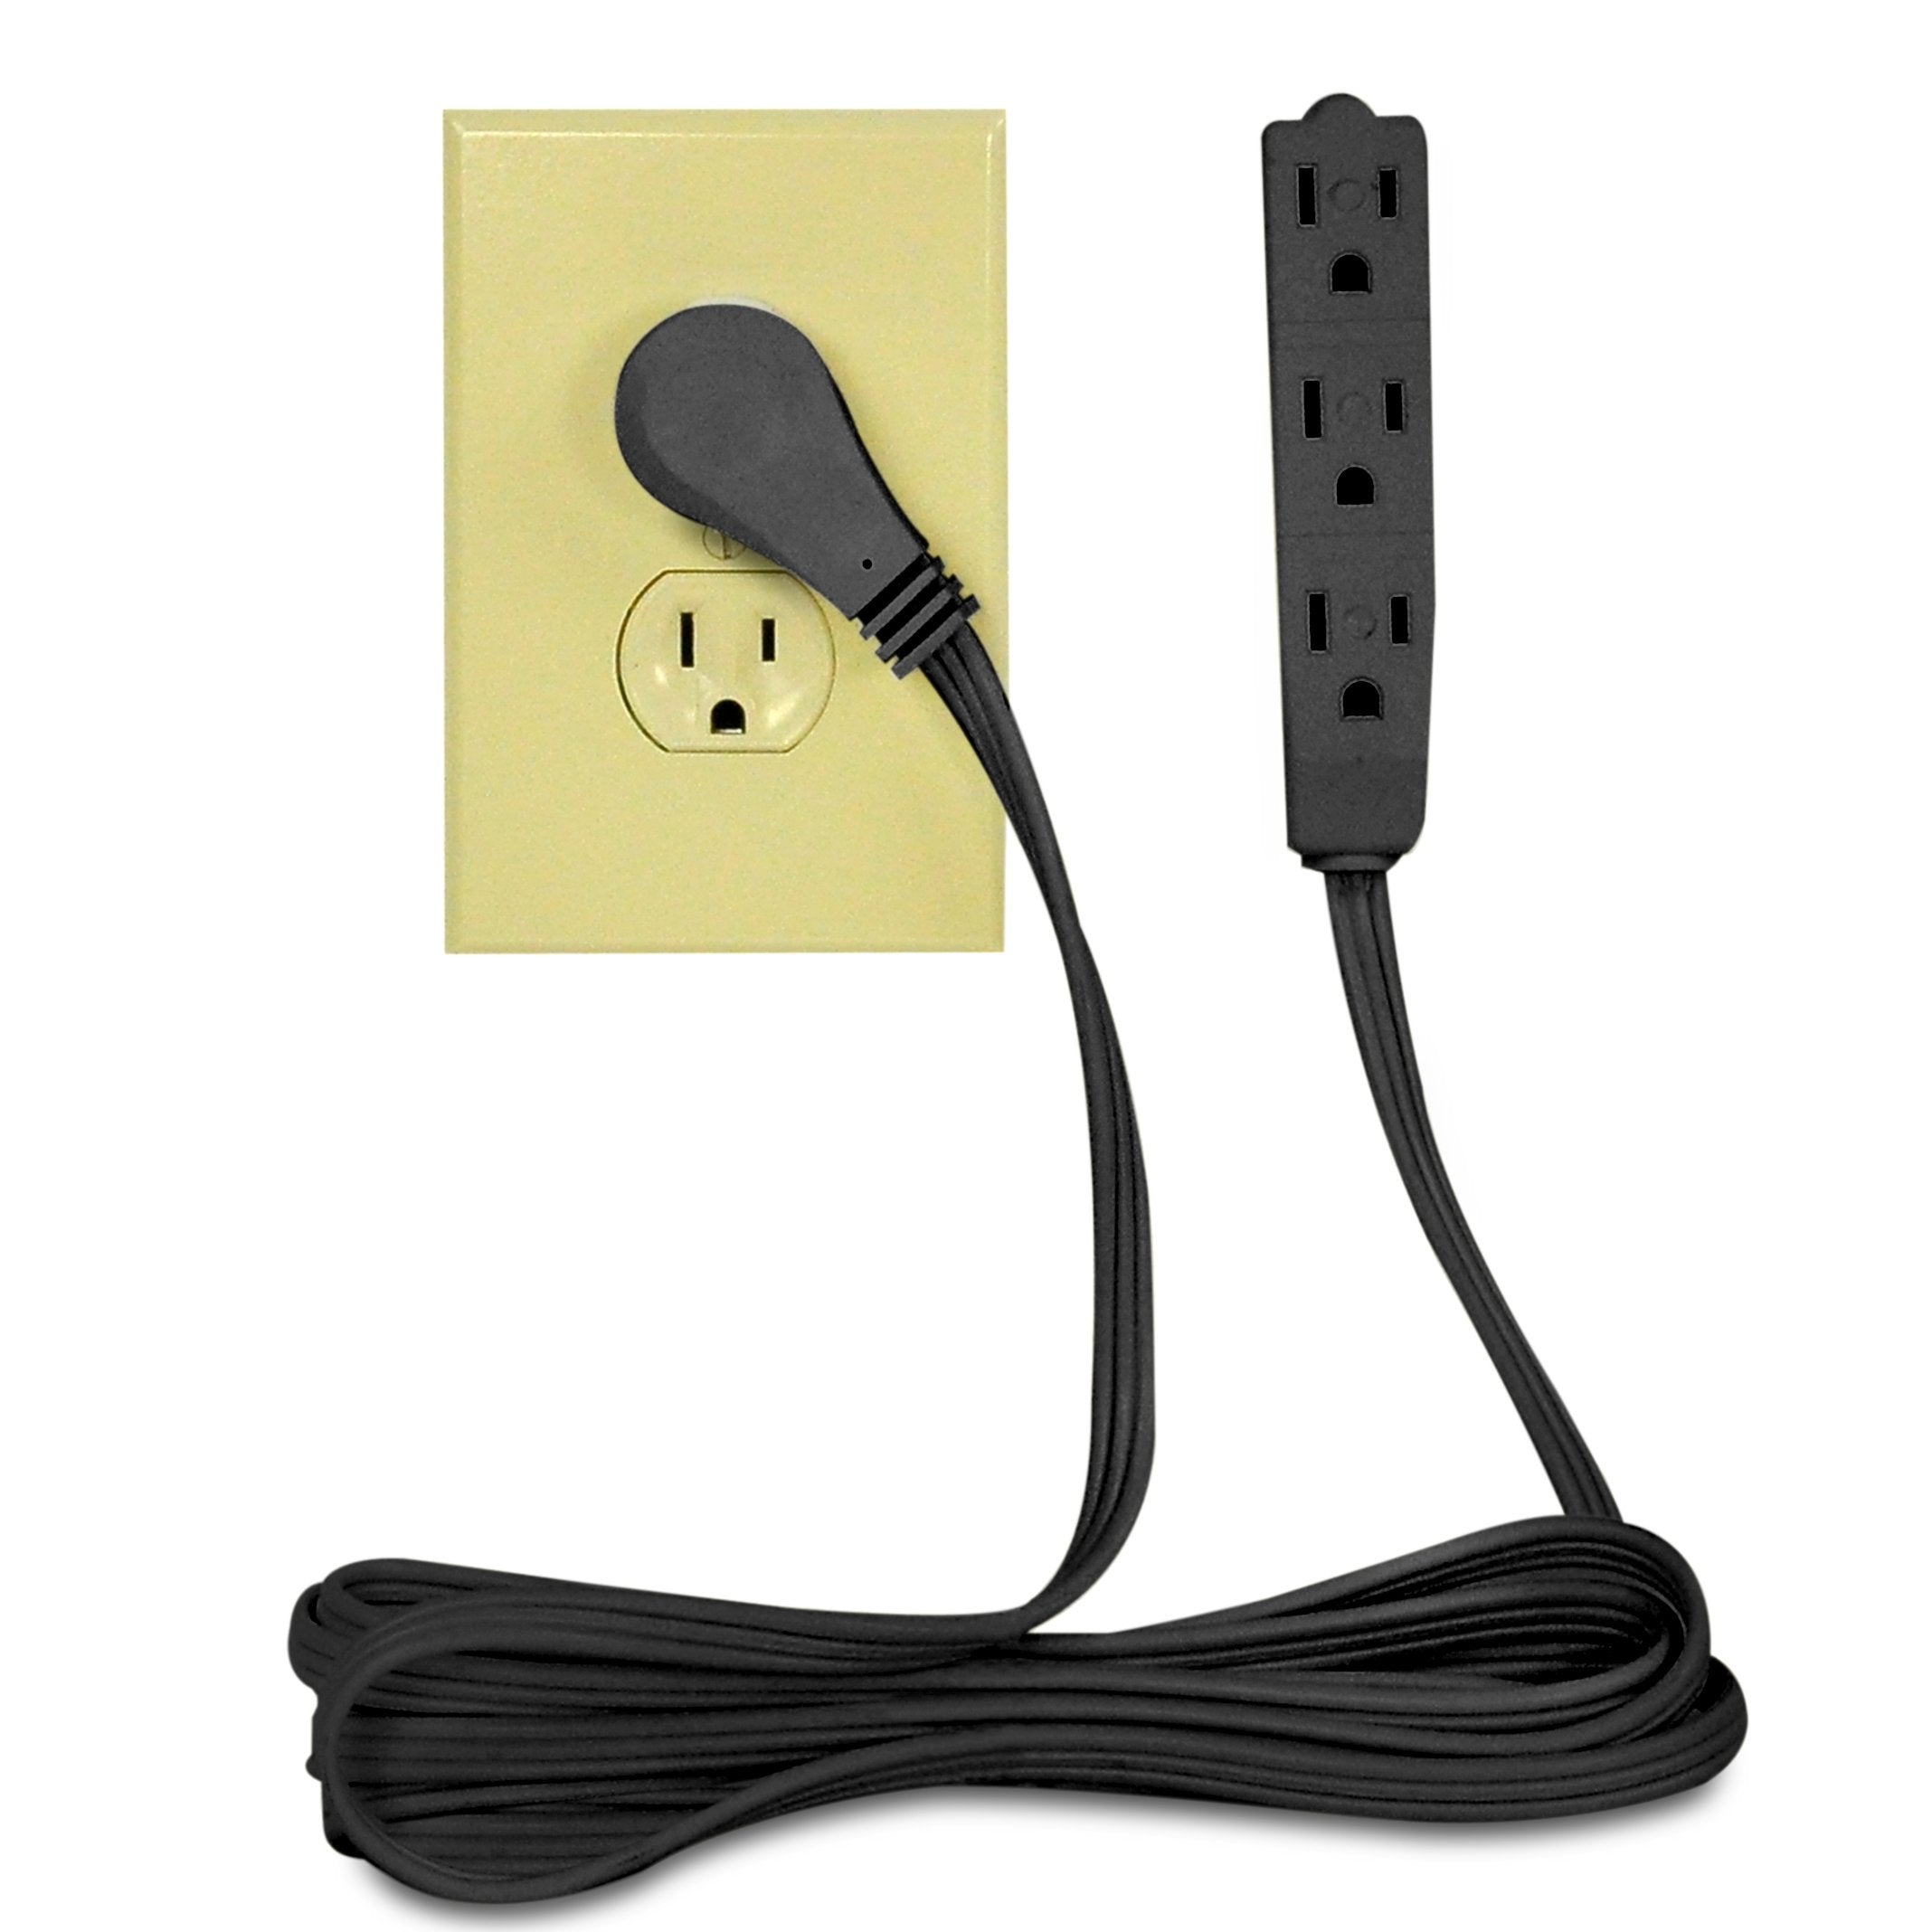 Flat Multiple Outlet Extension Cord for Indoor Use by Bindmaster- UL-Listed 3-Prong Multi Extension Wire- Space-Saving Flat Angled Extension Cord- Black  - Like New